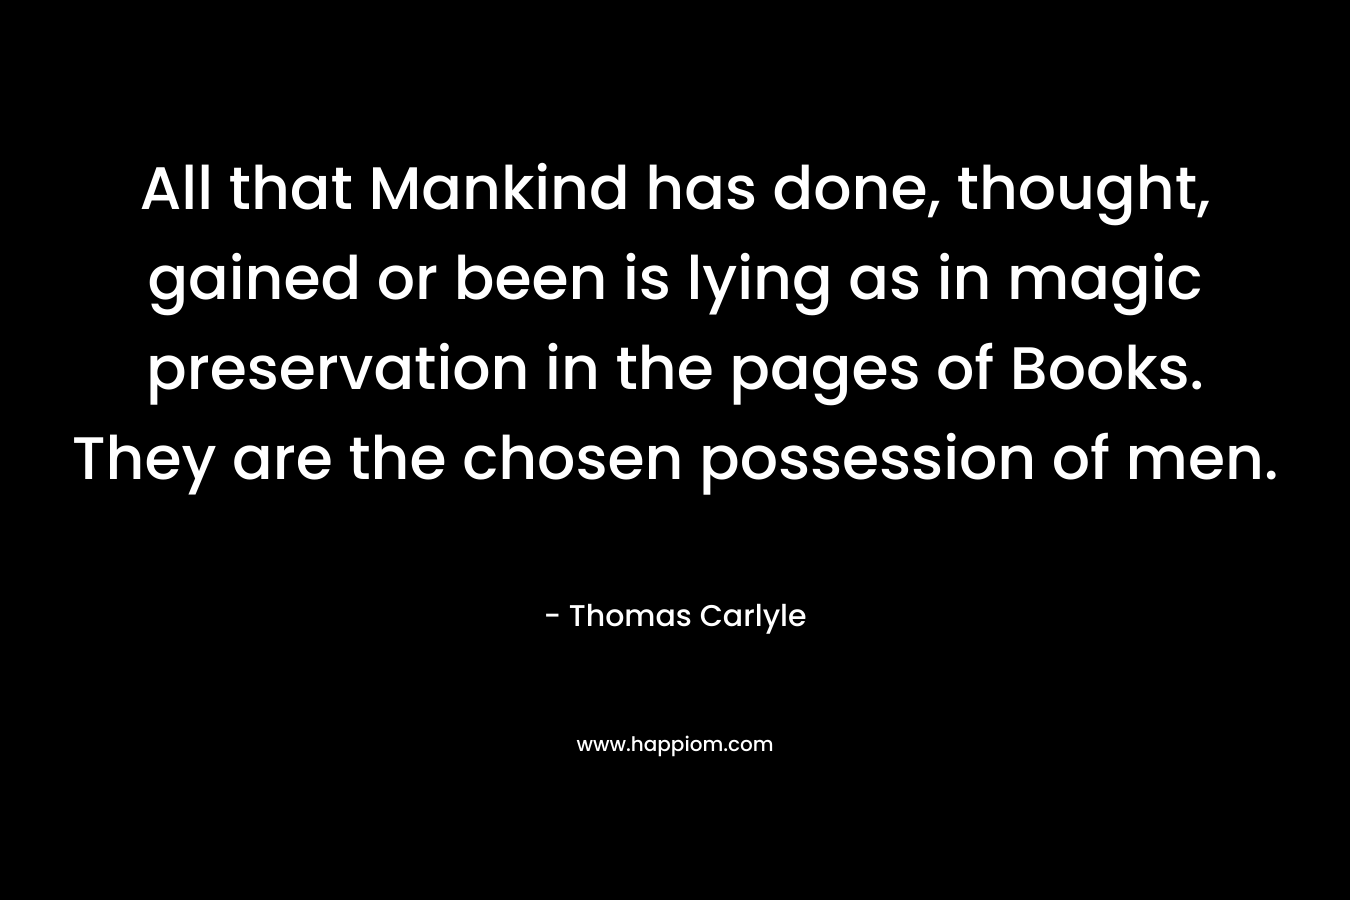 All that Mankind has done, thought, gained or been is lying as in magic preservation in the pages of Books. They are the chosen possession of men. – Thomas Carlyle